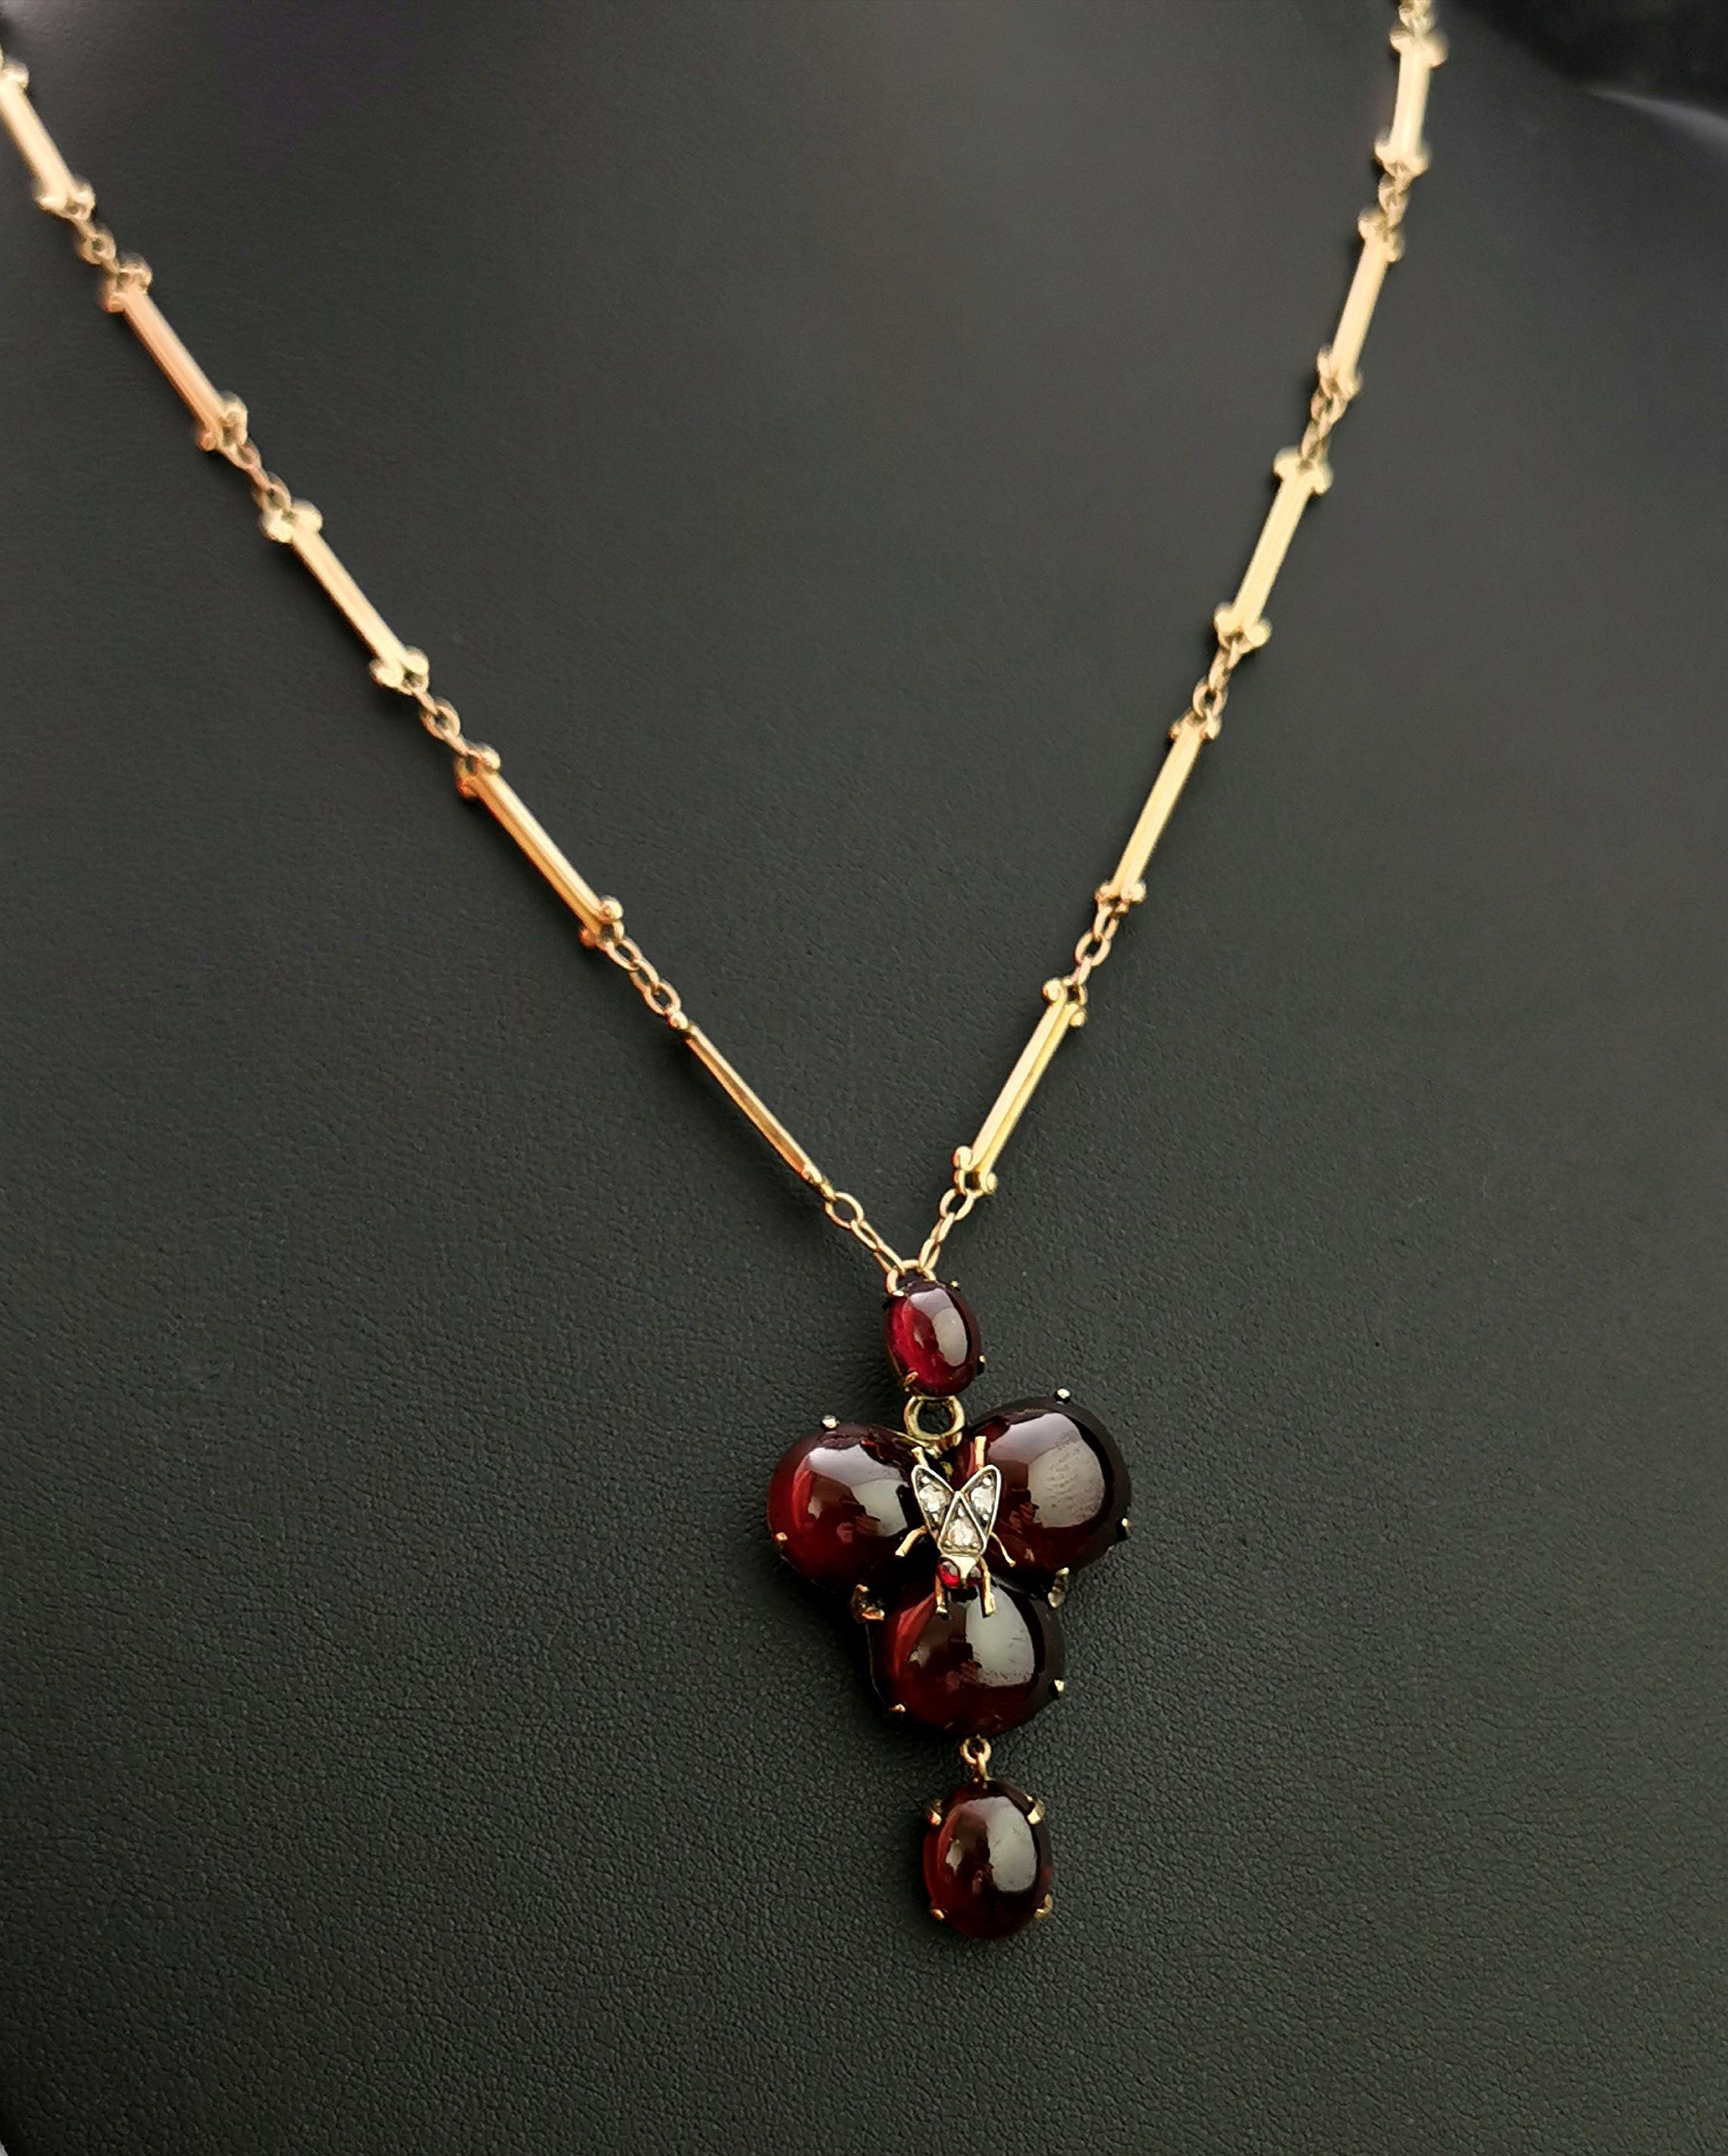 Victorian Mourning Pendant Necklace, Garnet, Diamond Fly, 18 Karat Yellow Gold For Sale 6